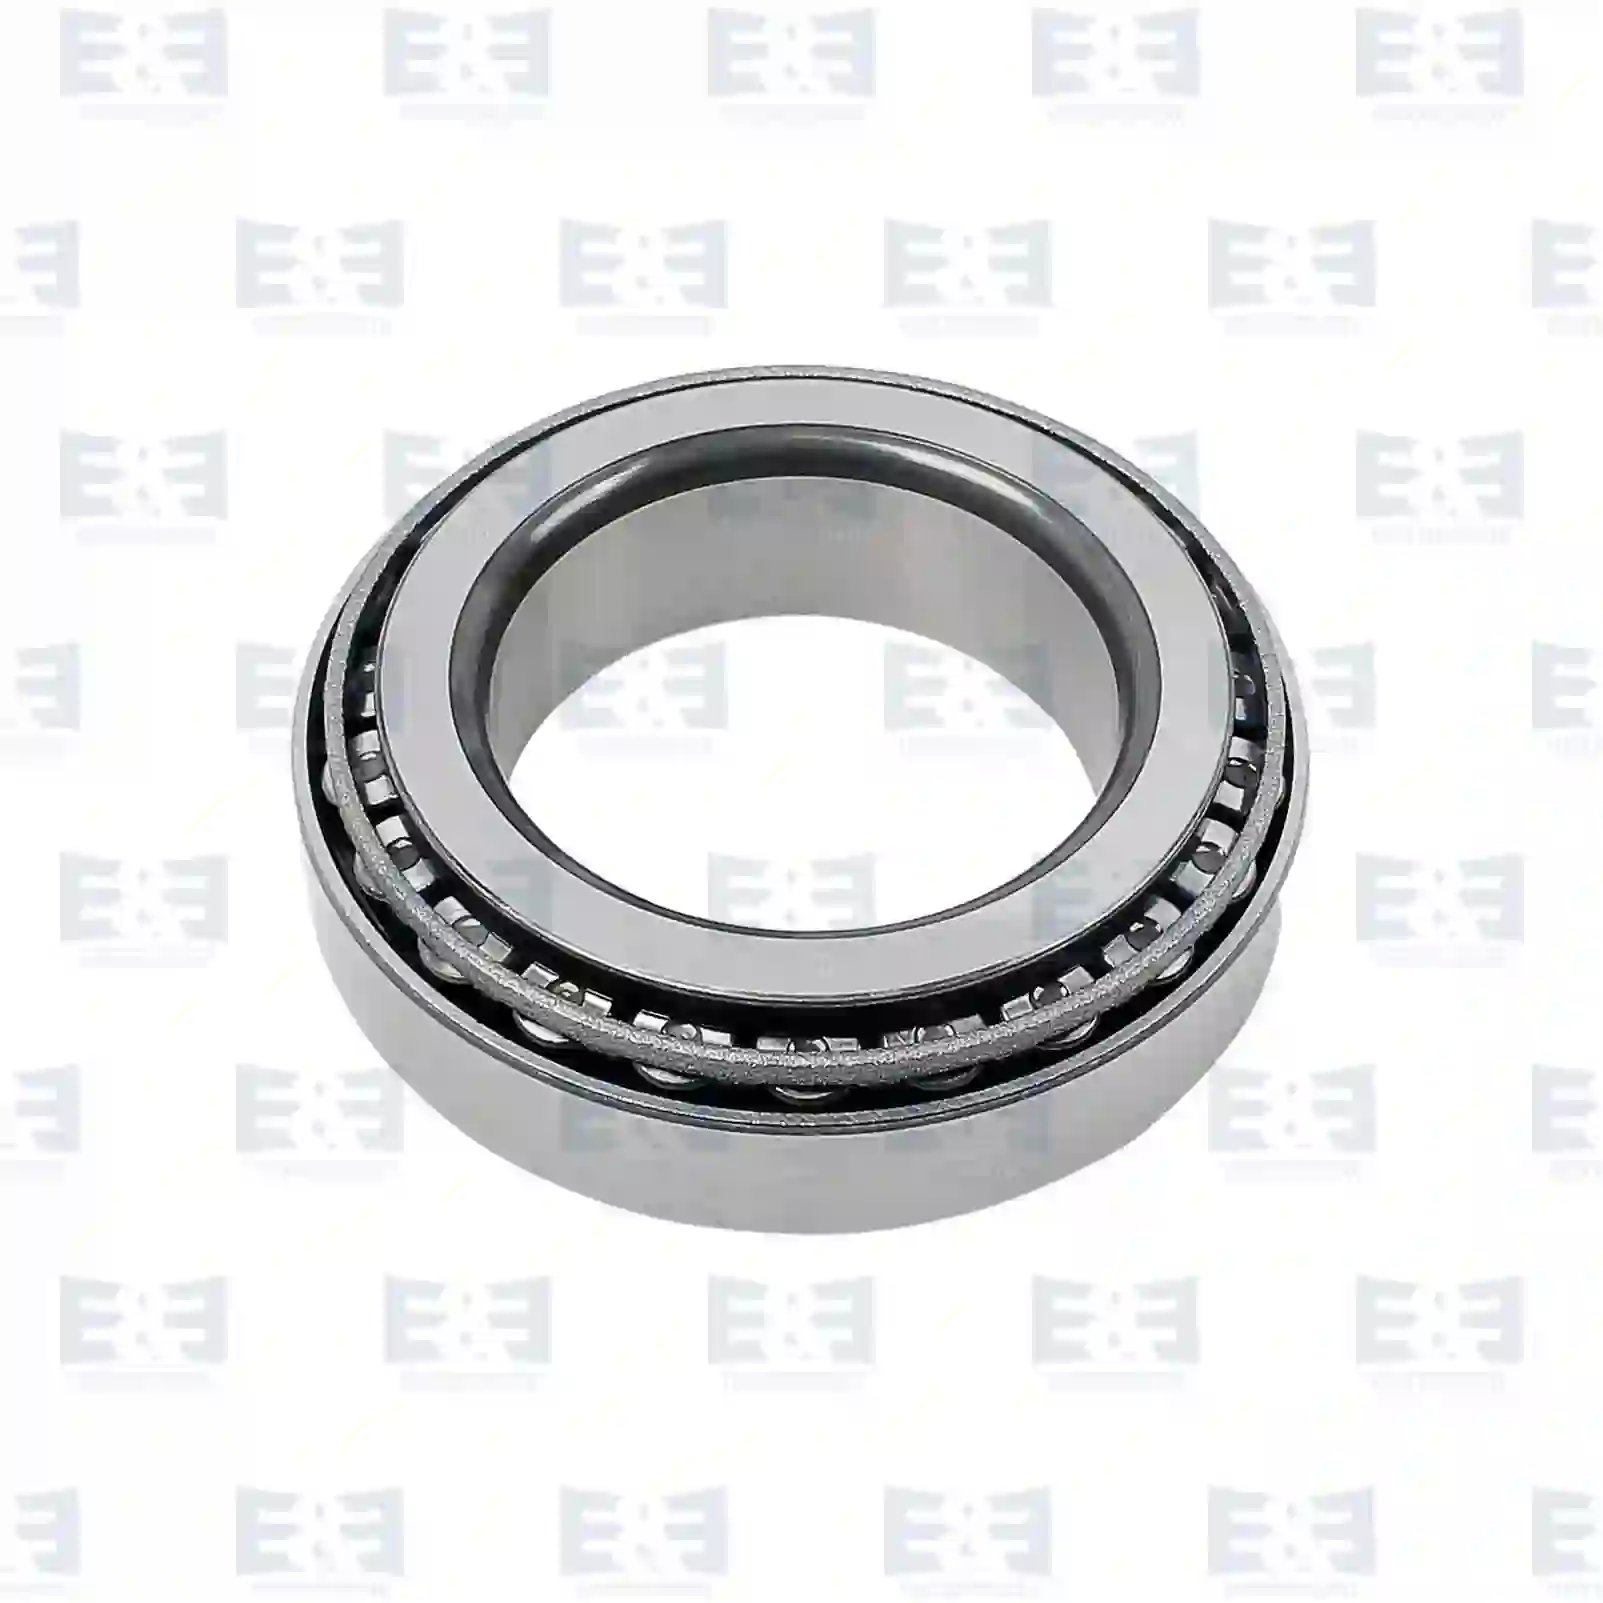  Wheel bearing kit || E&E Truck Spare Parts | Truck Spare Parts, Auotomotive Spare Parts